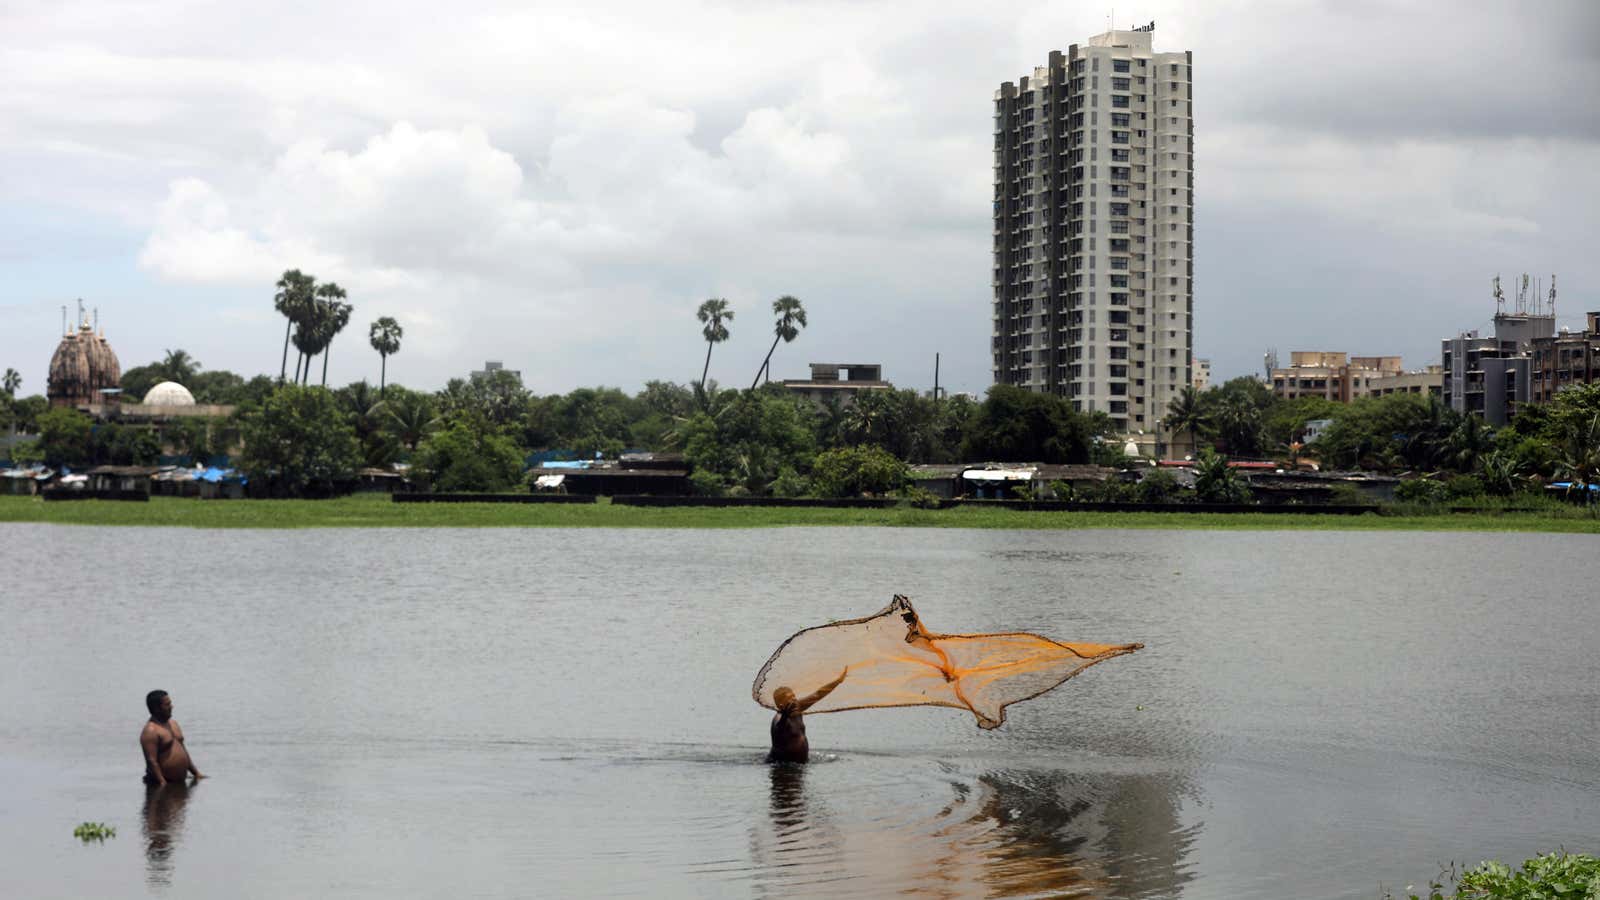 More than half of India's water bodies are private property